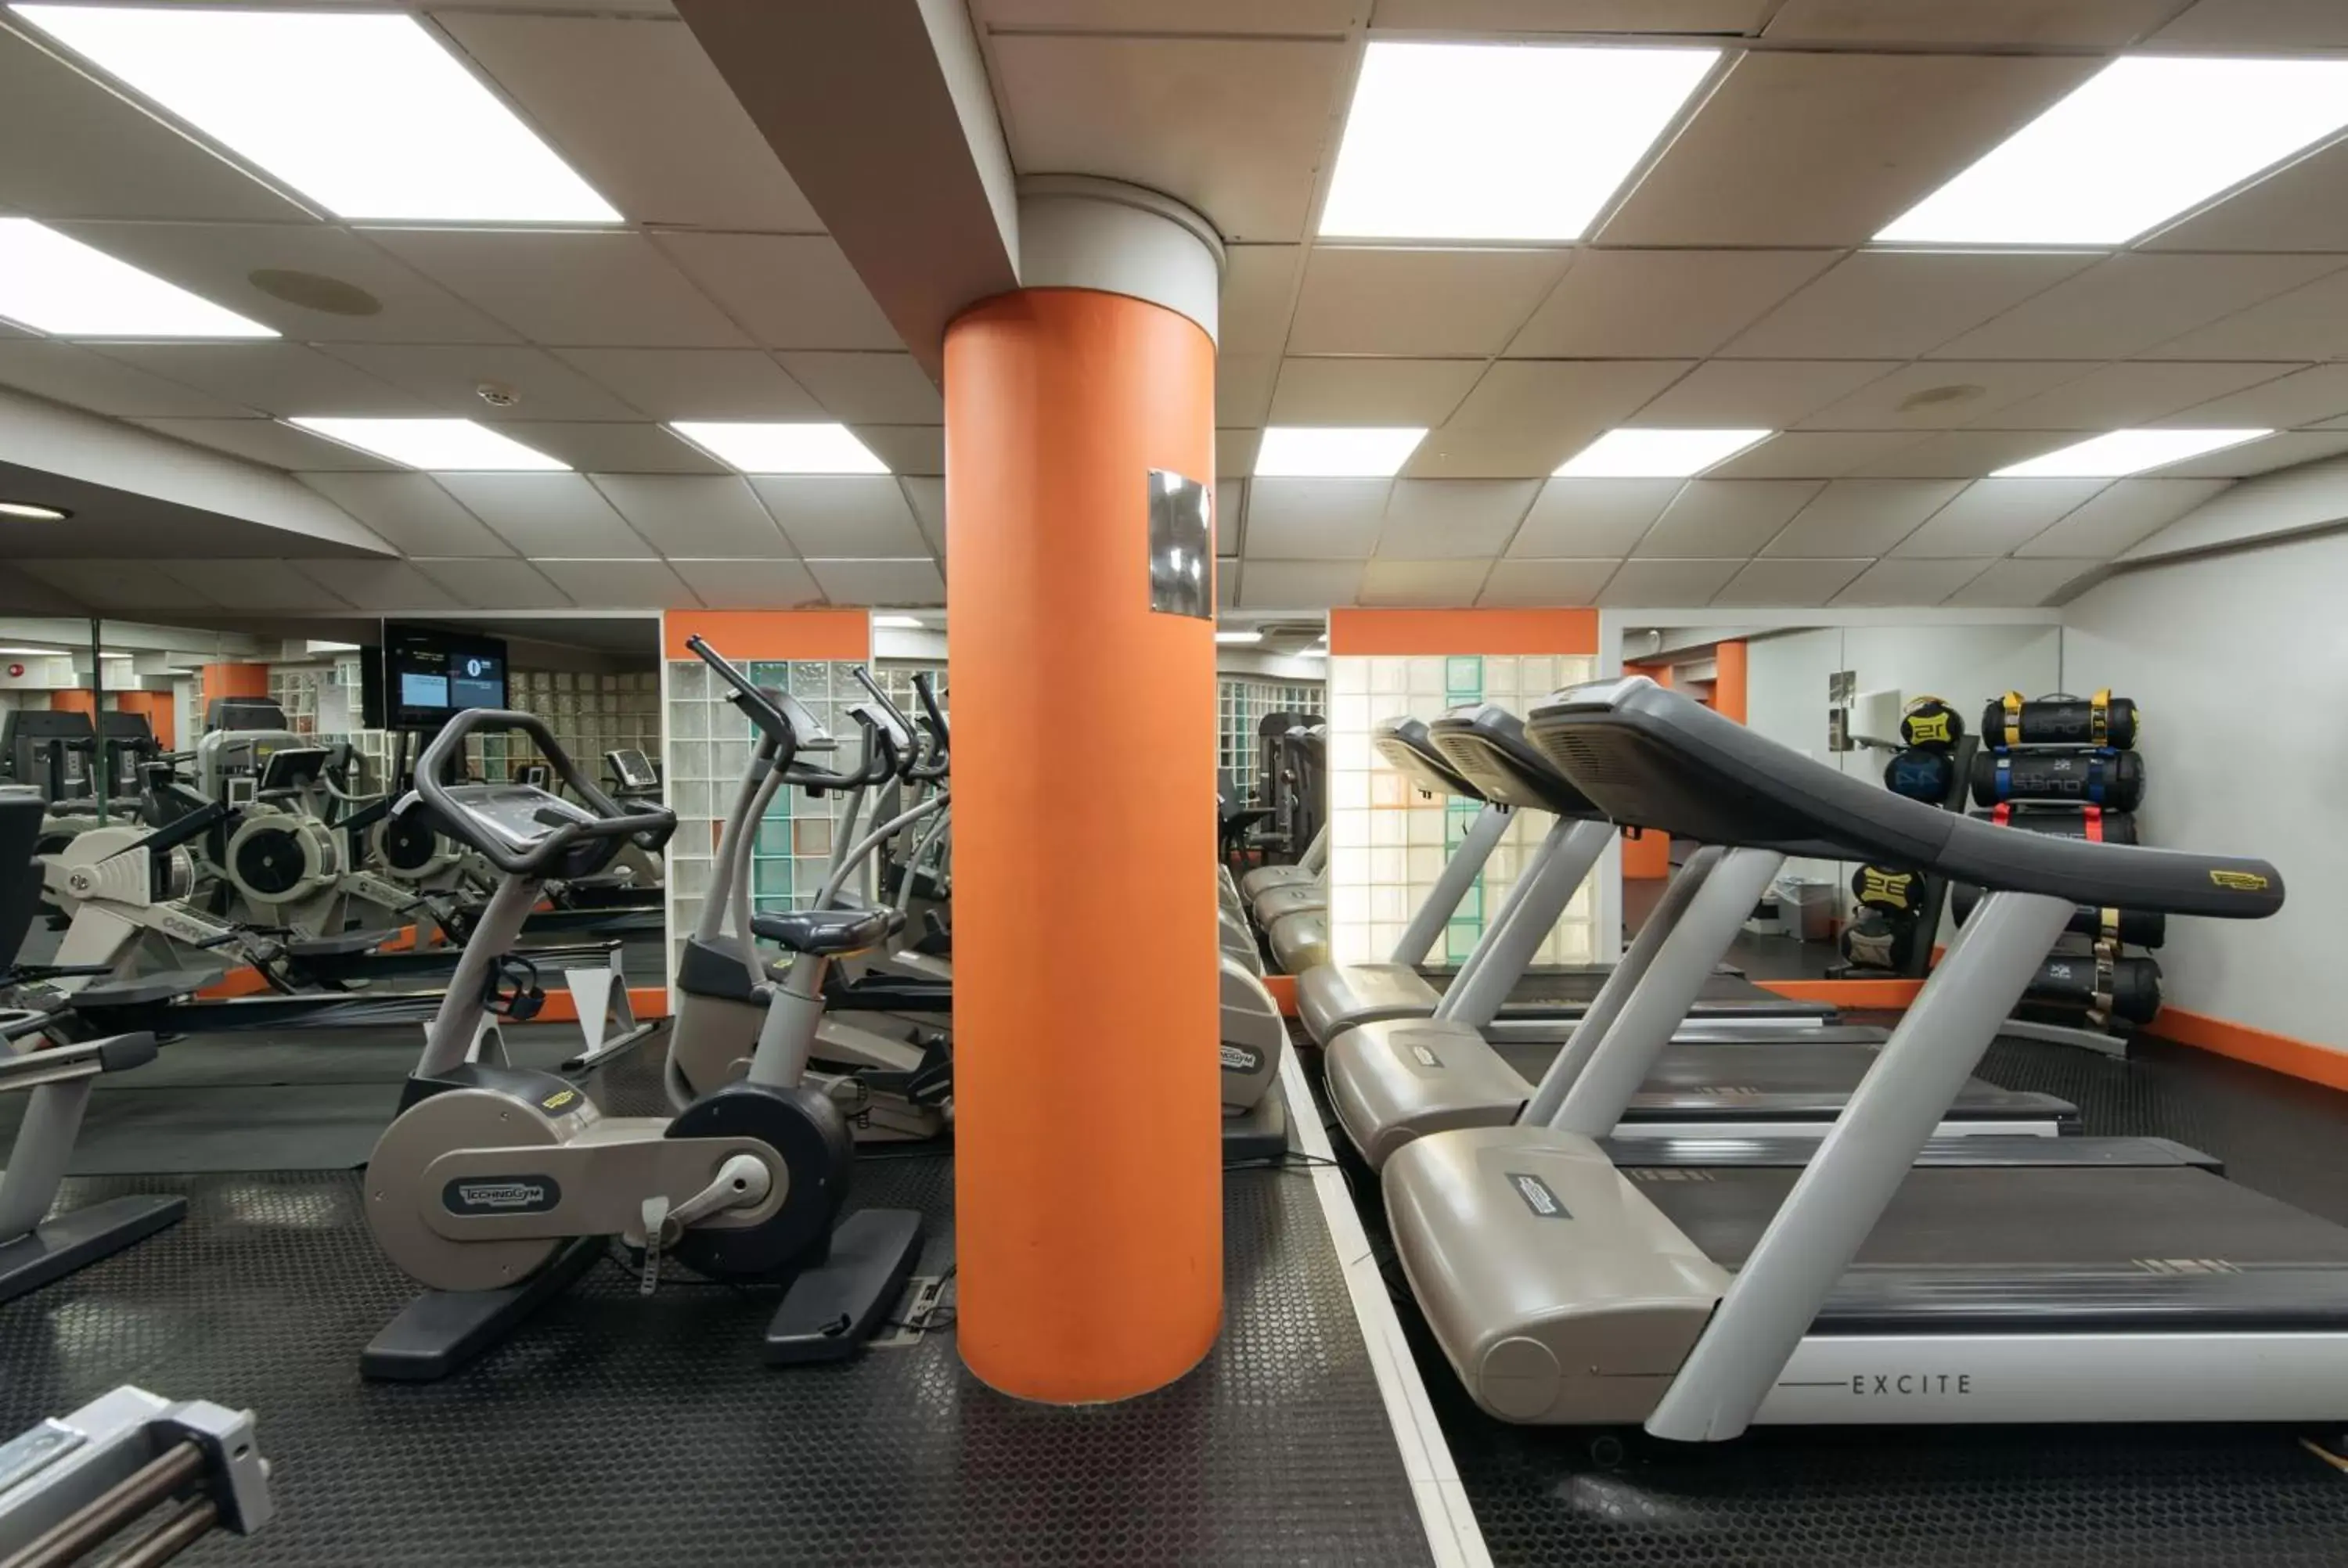 Fitness centre/facilities, Fitness Center/Facilities in The Palace Hotel